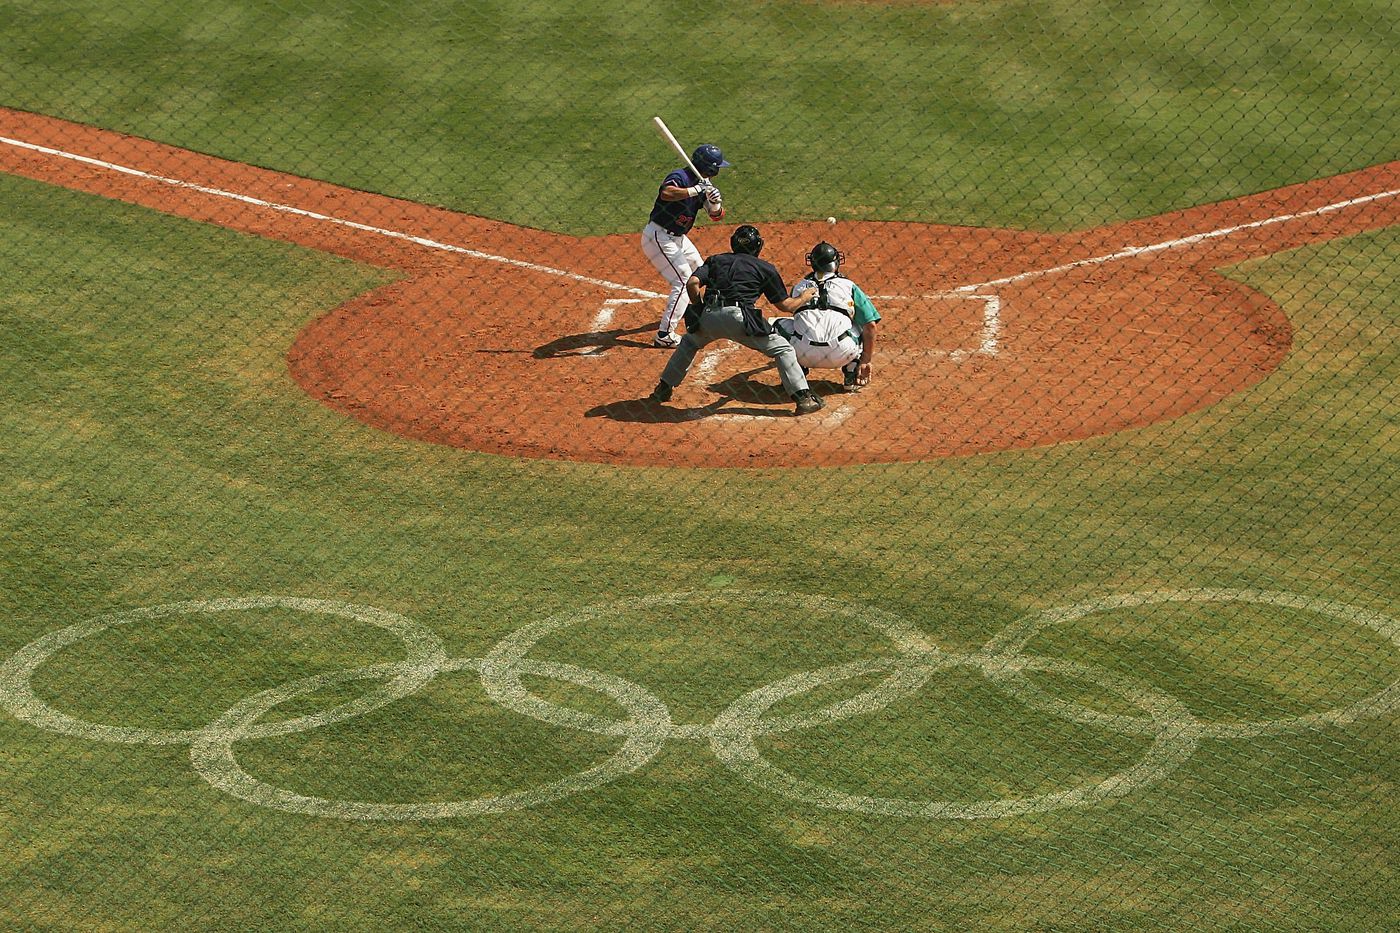 Tar Heel Olympians helped bring baseball to the global stage in ‘84